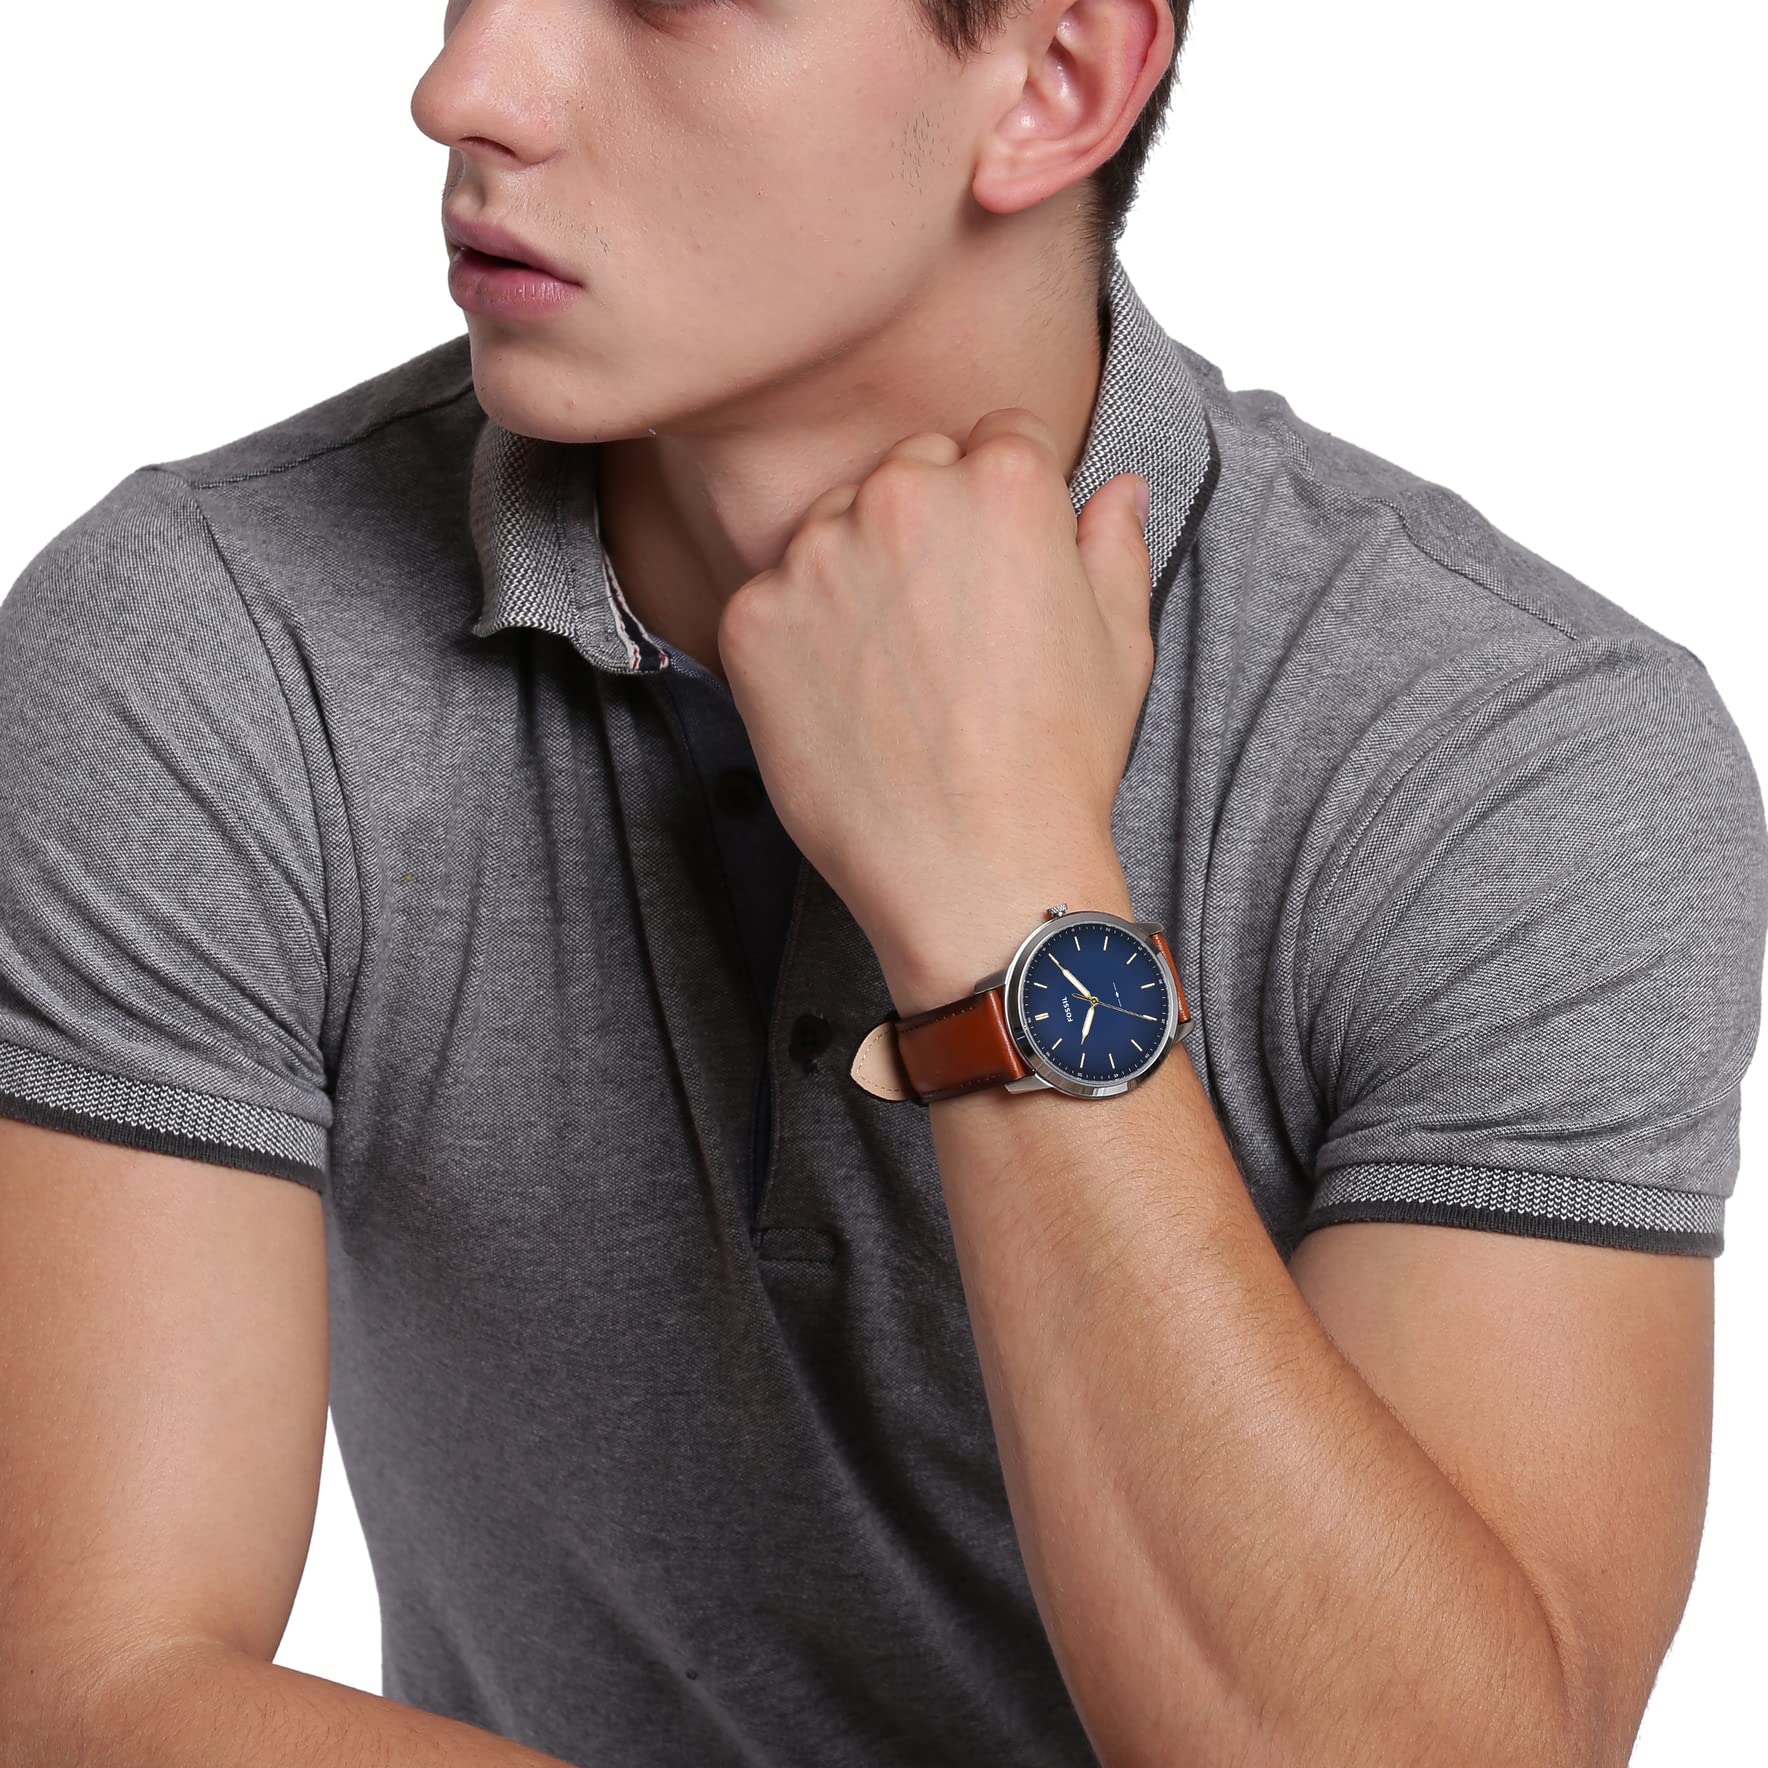 Fossil Minimalist Men's Watch with Leather or Stainless Steel Band, Chronograph or Analog Watch Display with Slim Case Design